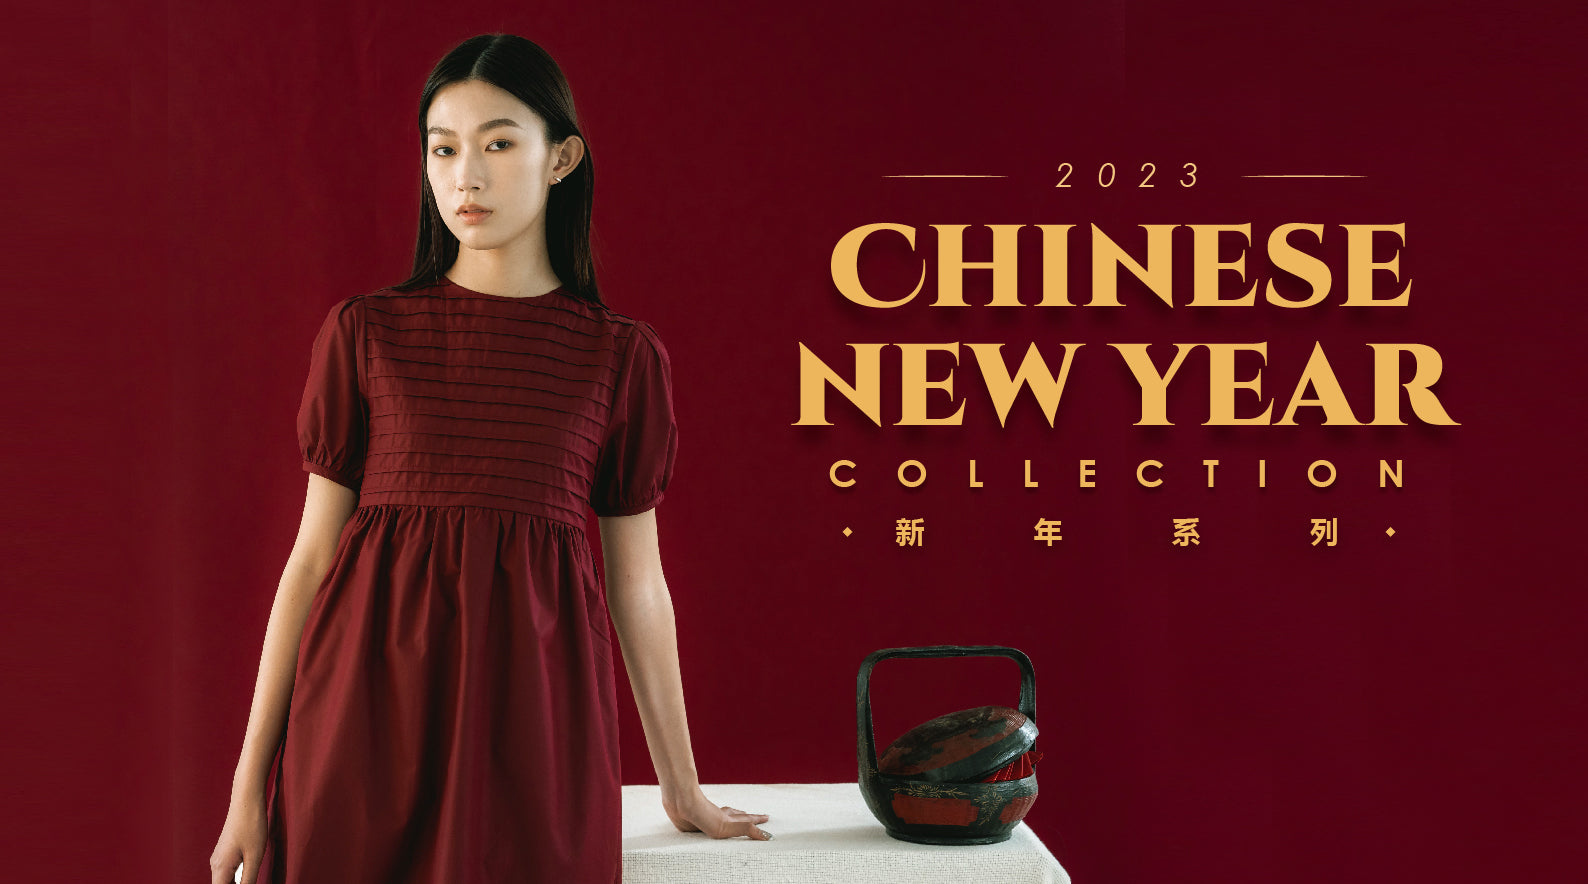 Chinese New Year Collection 2023